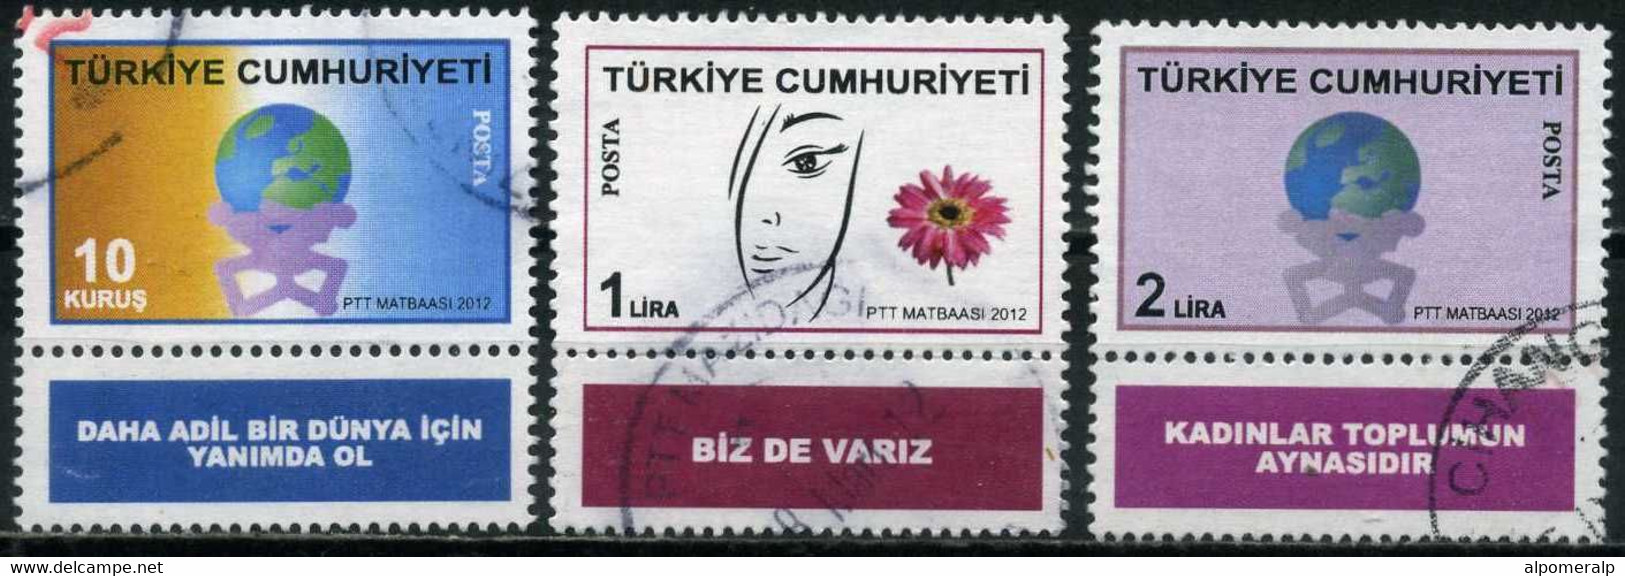 Turkey 2012 - Mi. 3930 Zf -3932 Zf O | Ensuring Equal Opportunities For Men And Women - Used Stamps